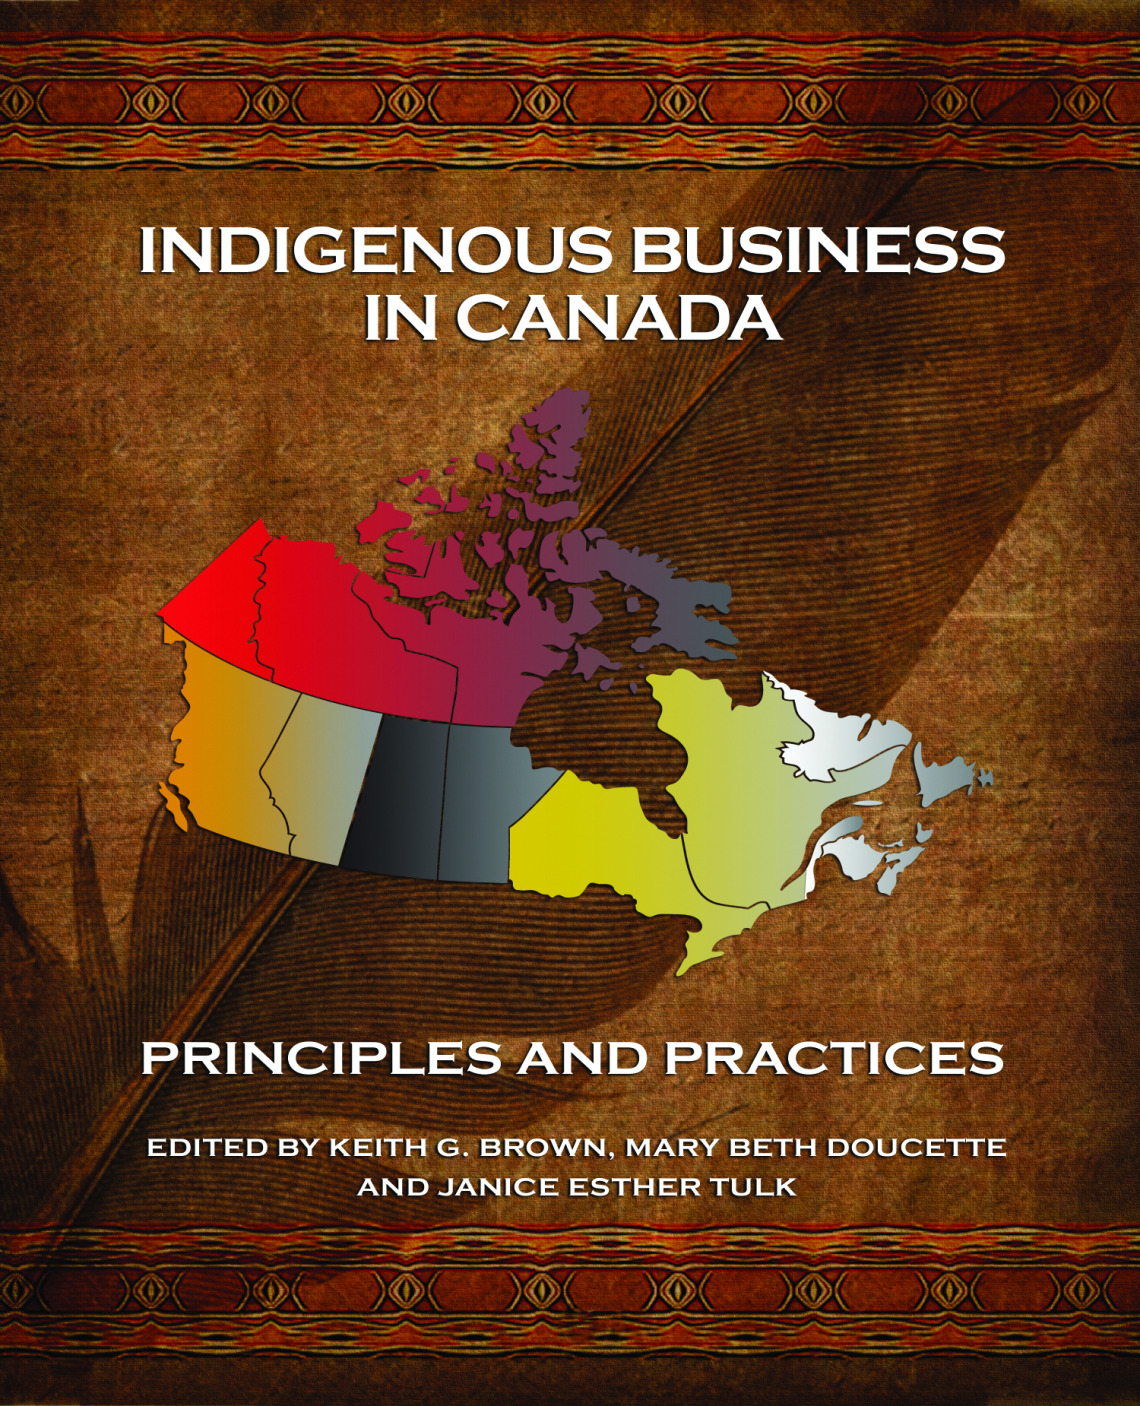 Land and Indigenous business development in Canada